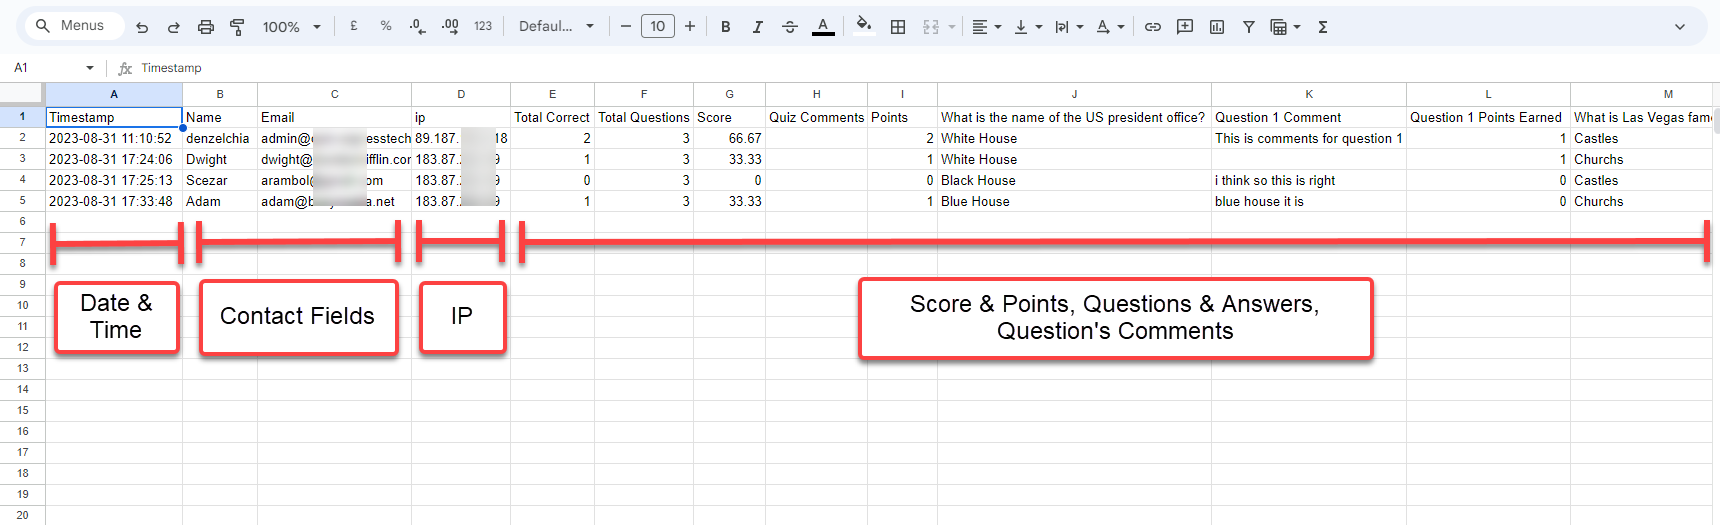 Quiz and Survey Master - Google Sheets Connector Addon - Data saved in Google Sheets